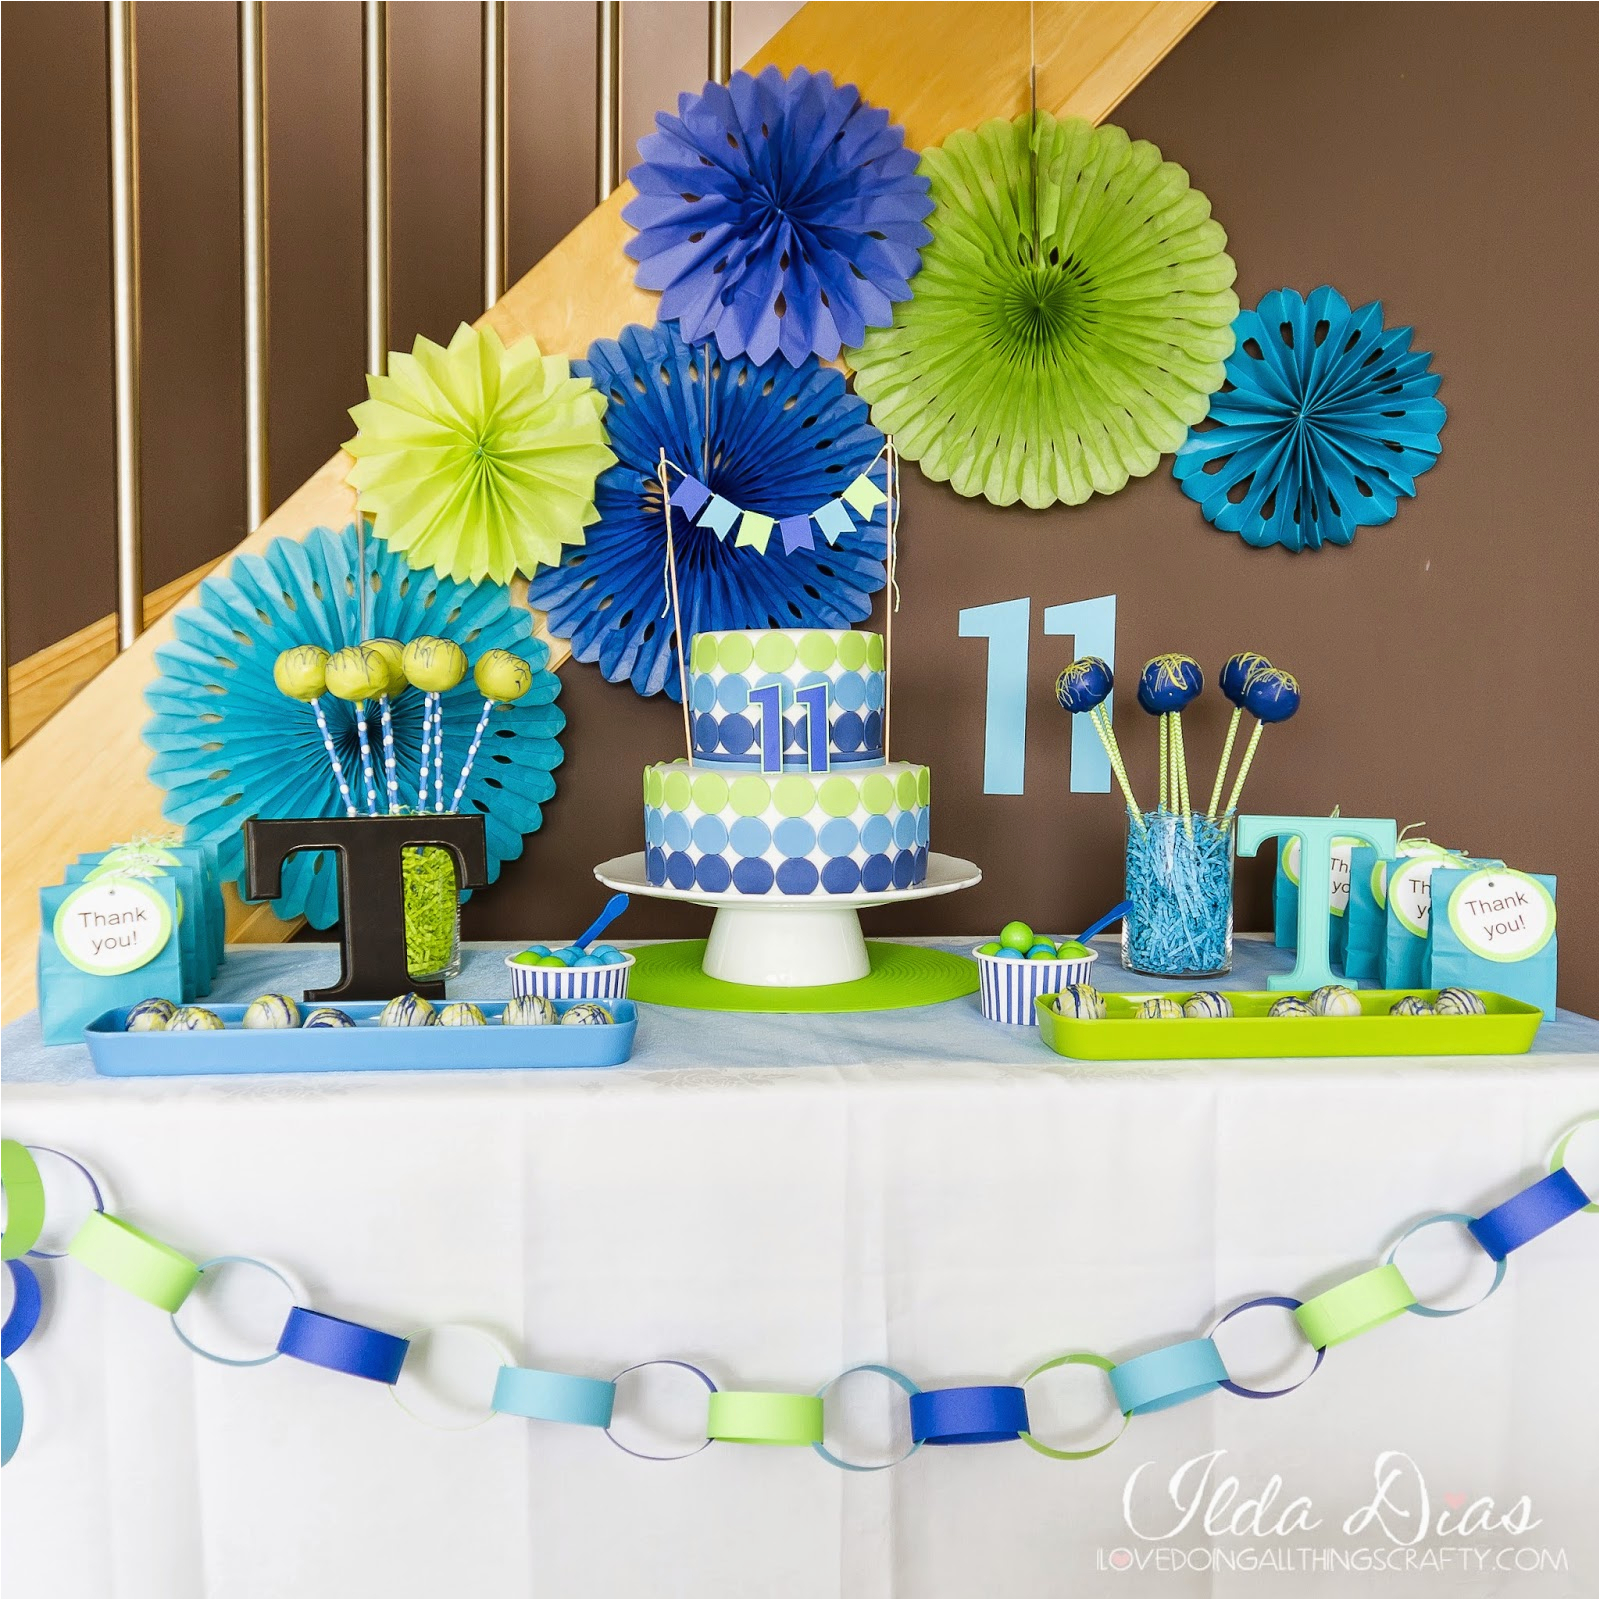 Blue and Green Birthday Party Decorations I Love Doing All Things Crafty Simple Blue and Green